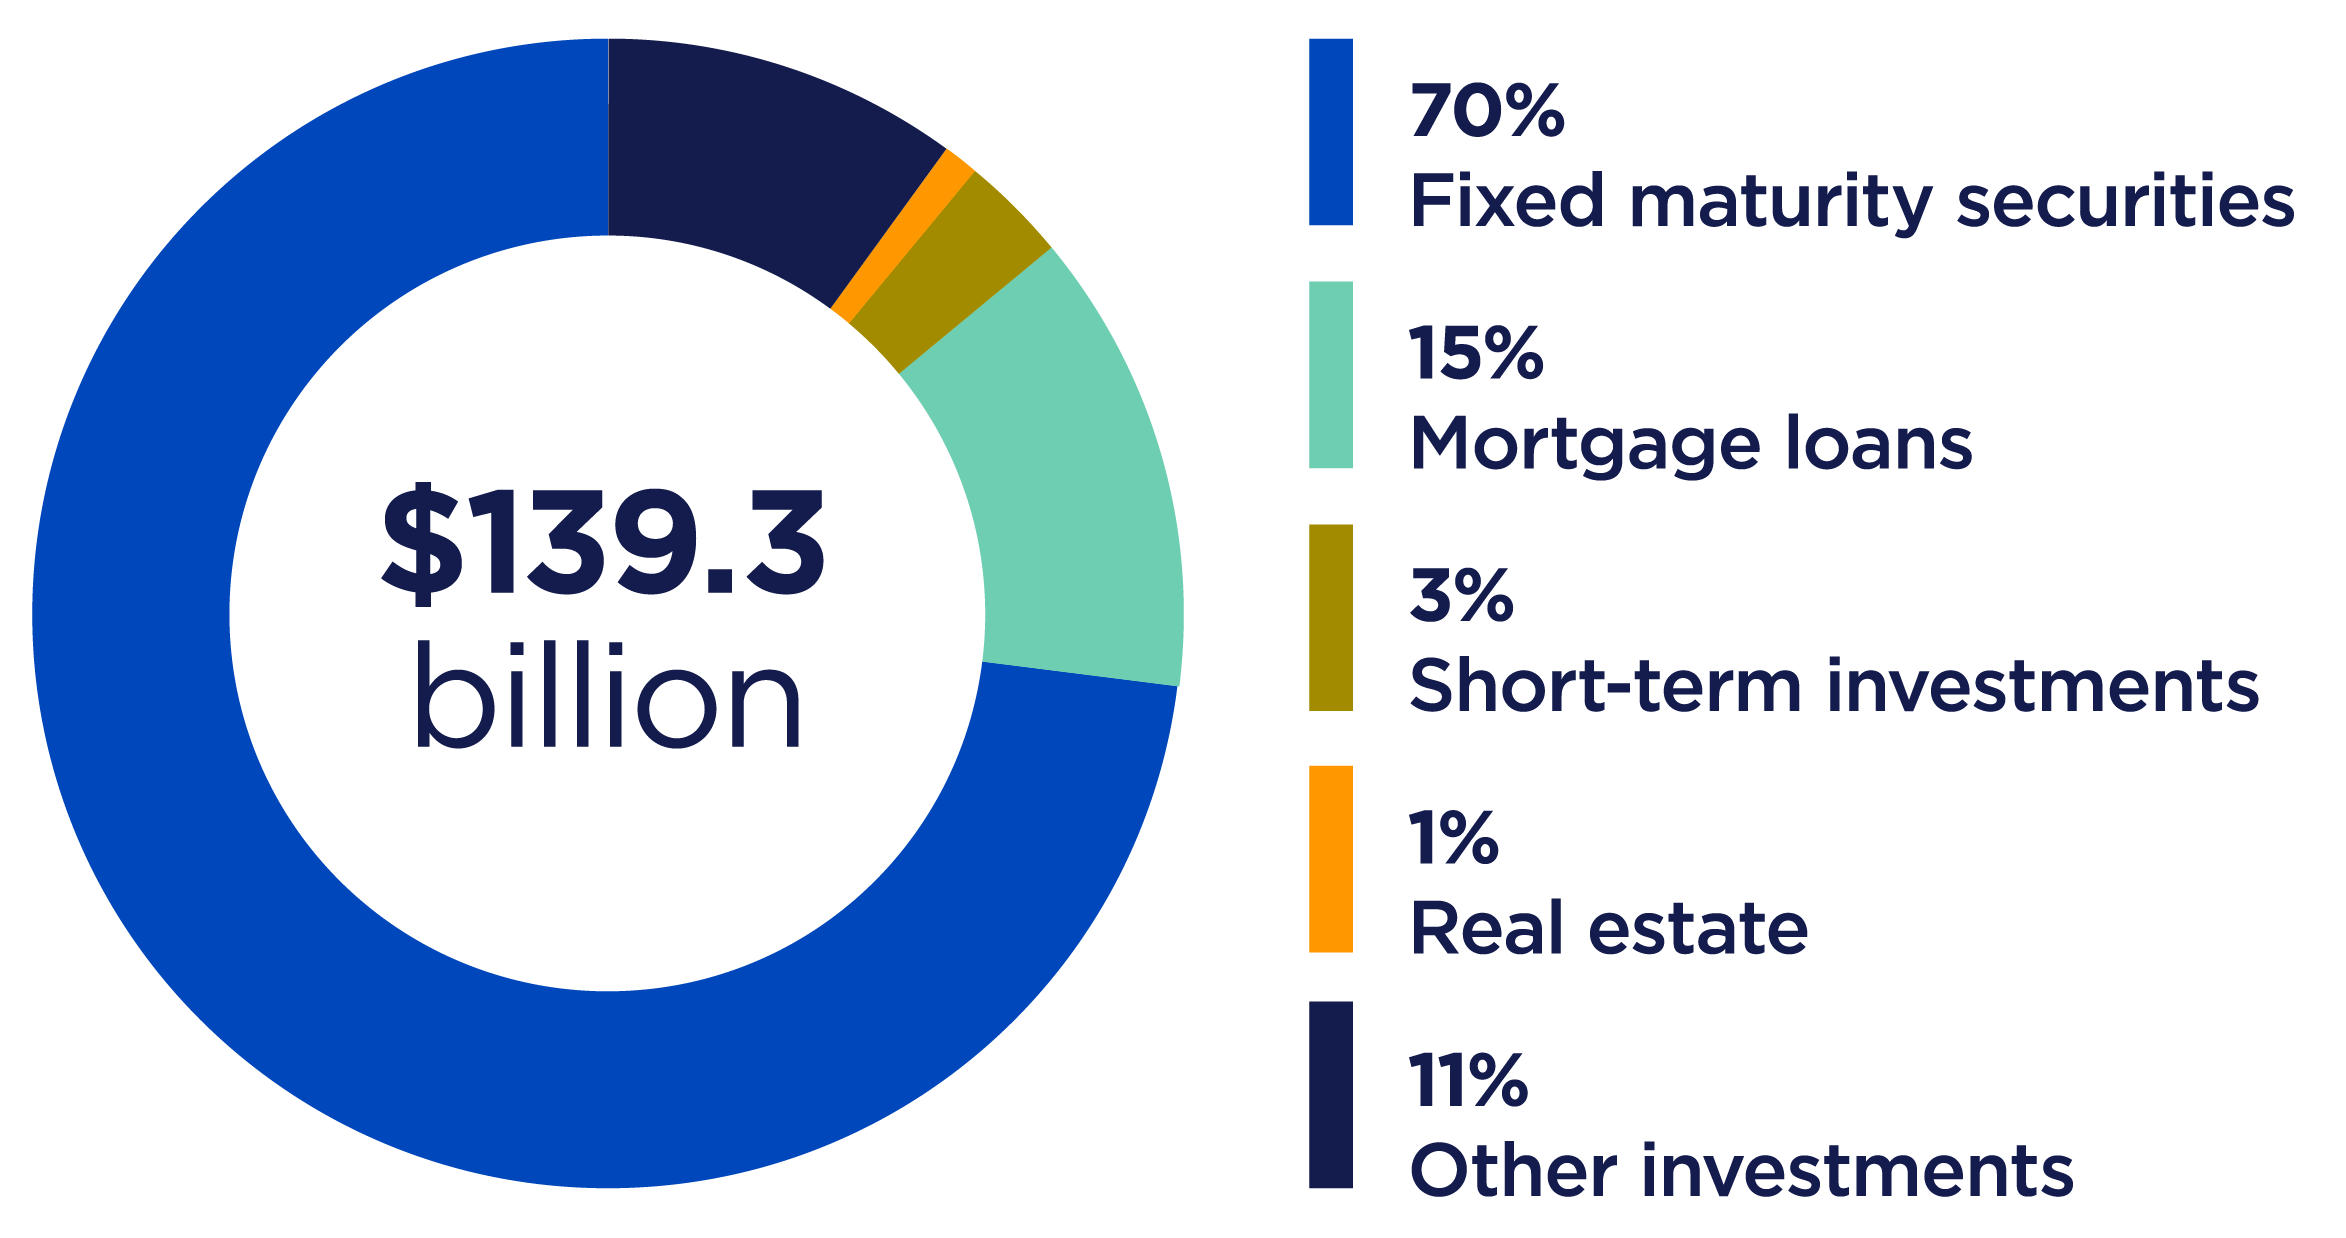 A circular graph shows that the investments totaling $139.3 billion are made up of the following investment mix: 70% fixed maturity securities, 15% mortgage loans, 3% short-term investments, 1% real estate and 11% other investments.